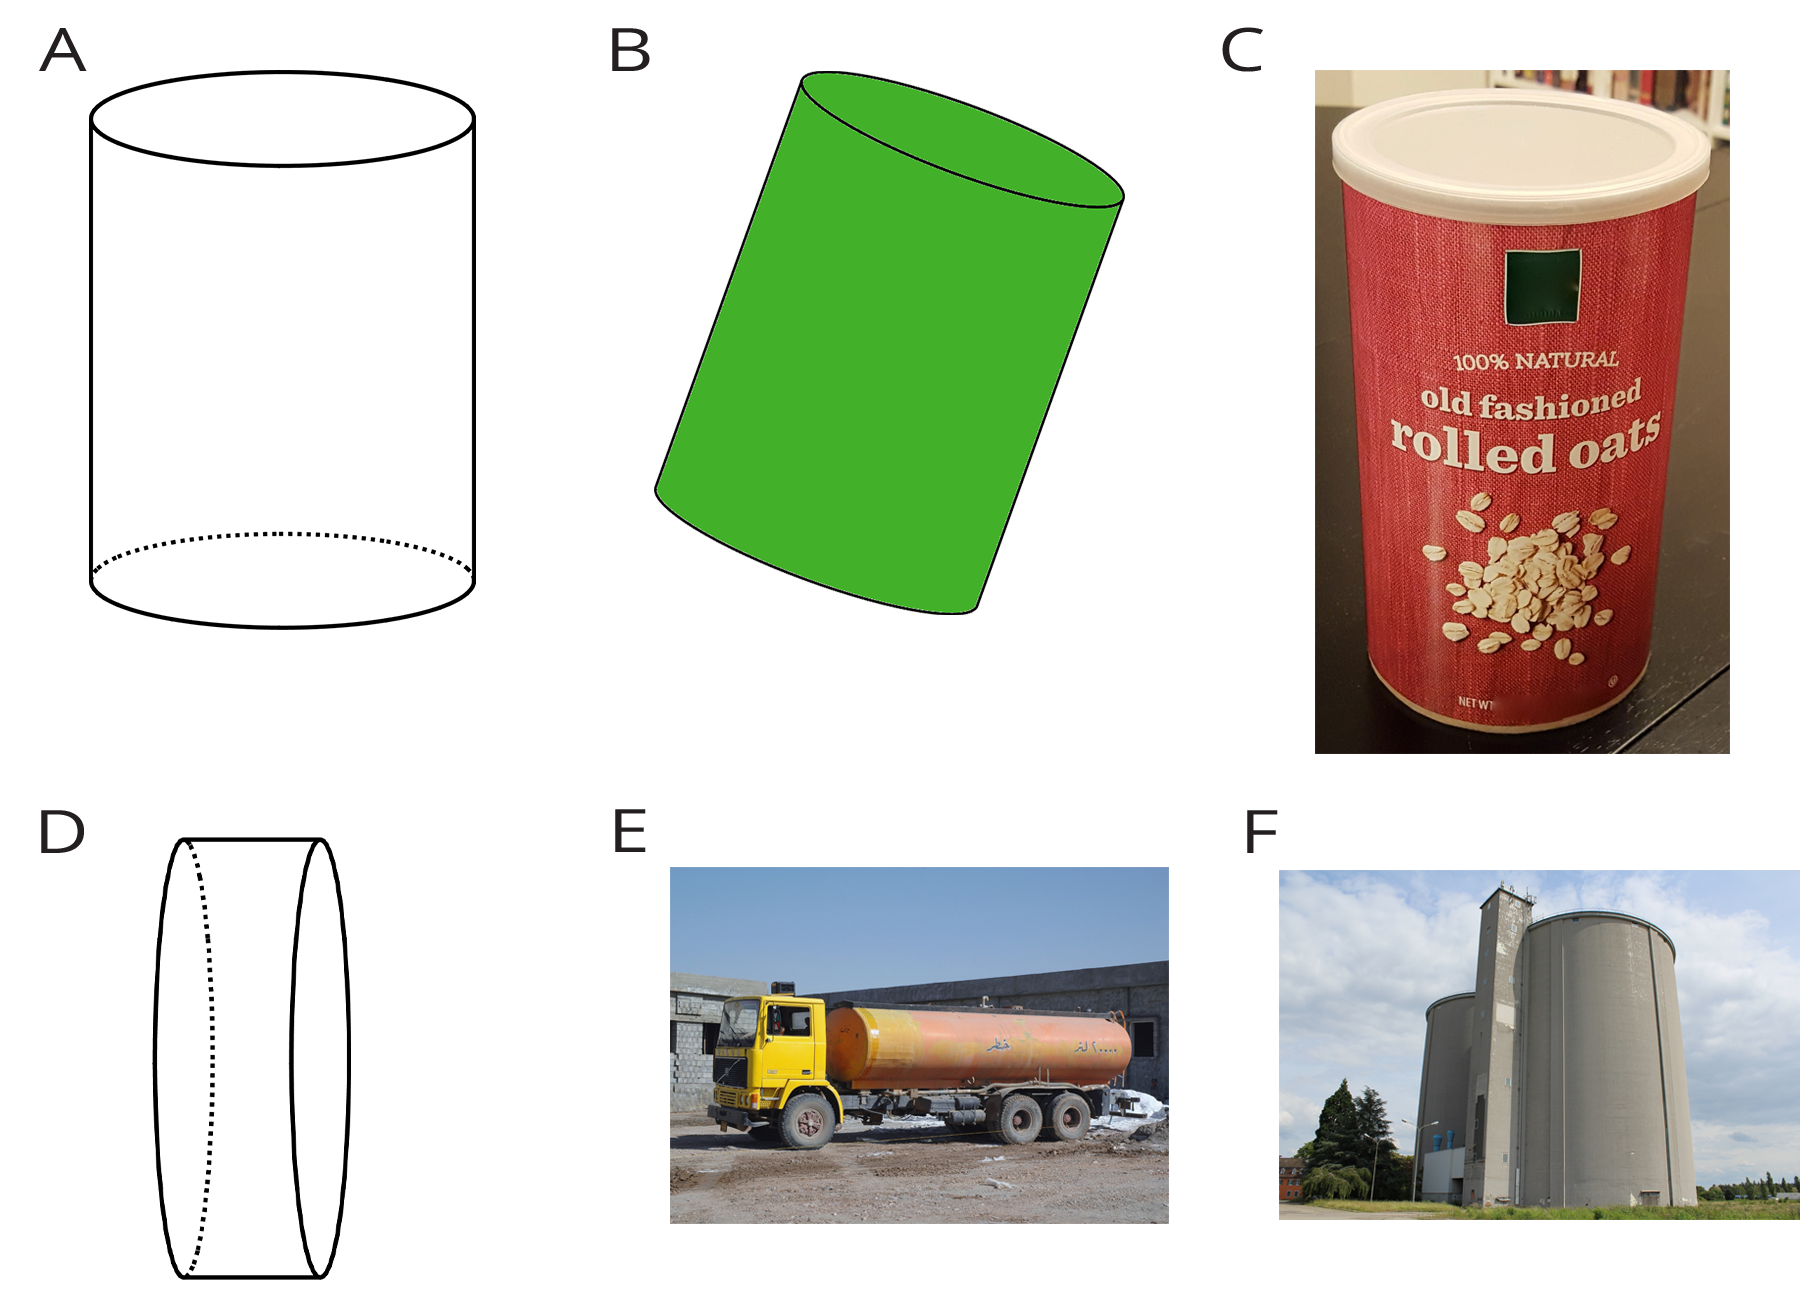 A collection of six cylinder images labeled "A" through "F".  Image "A" is the drawing of a cylinder that lies on its bottom base; Image "B" is the drawing of solid, green cylinder tilted to the right; Image "C" is an image of an oatmeal container in the shape of a cylinder; Image "D" is the drawing of a cylinder that lies on its rectangular face; Image "E" is an image of a tanker, 18-wheeler truck which in the shape of a cylinder Image "F" is an image of a farm grain silo that is in the shape of a cylinder.